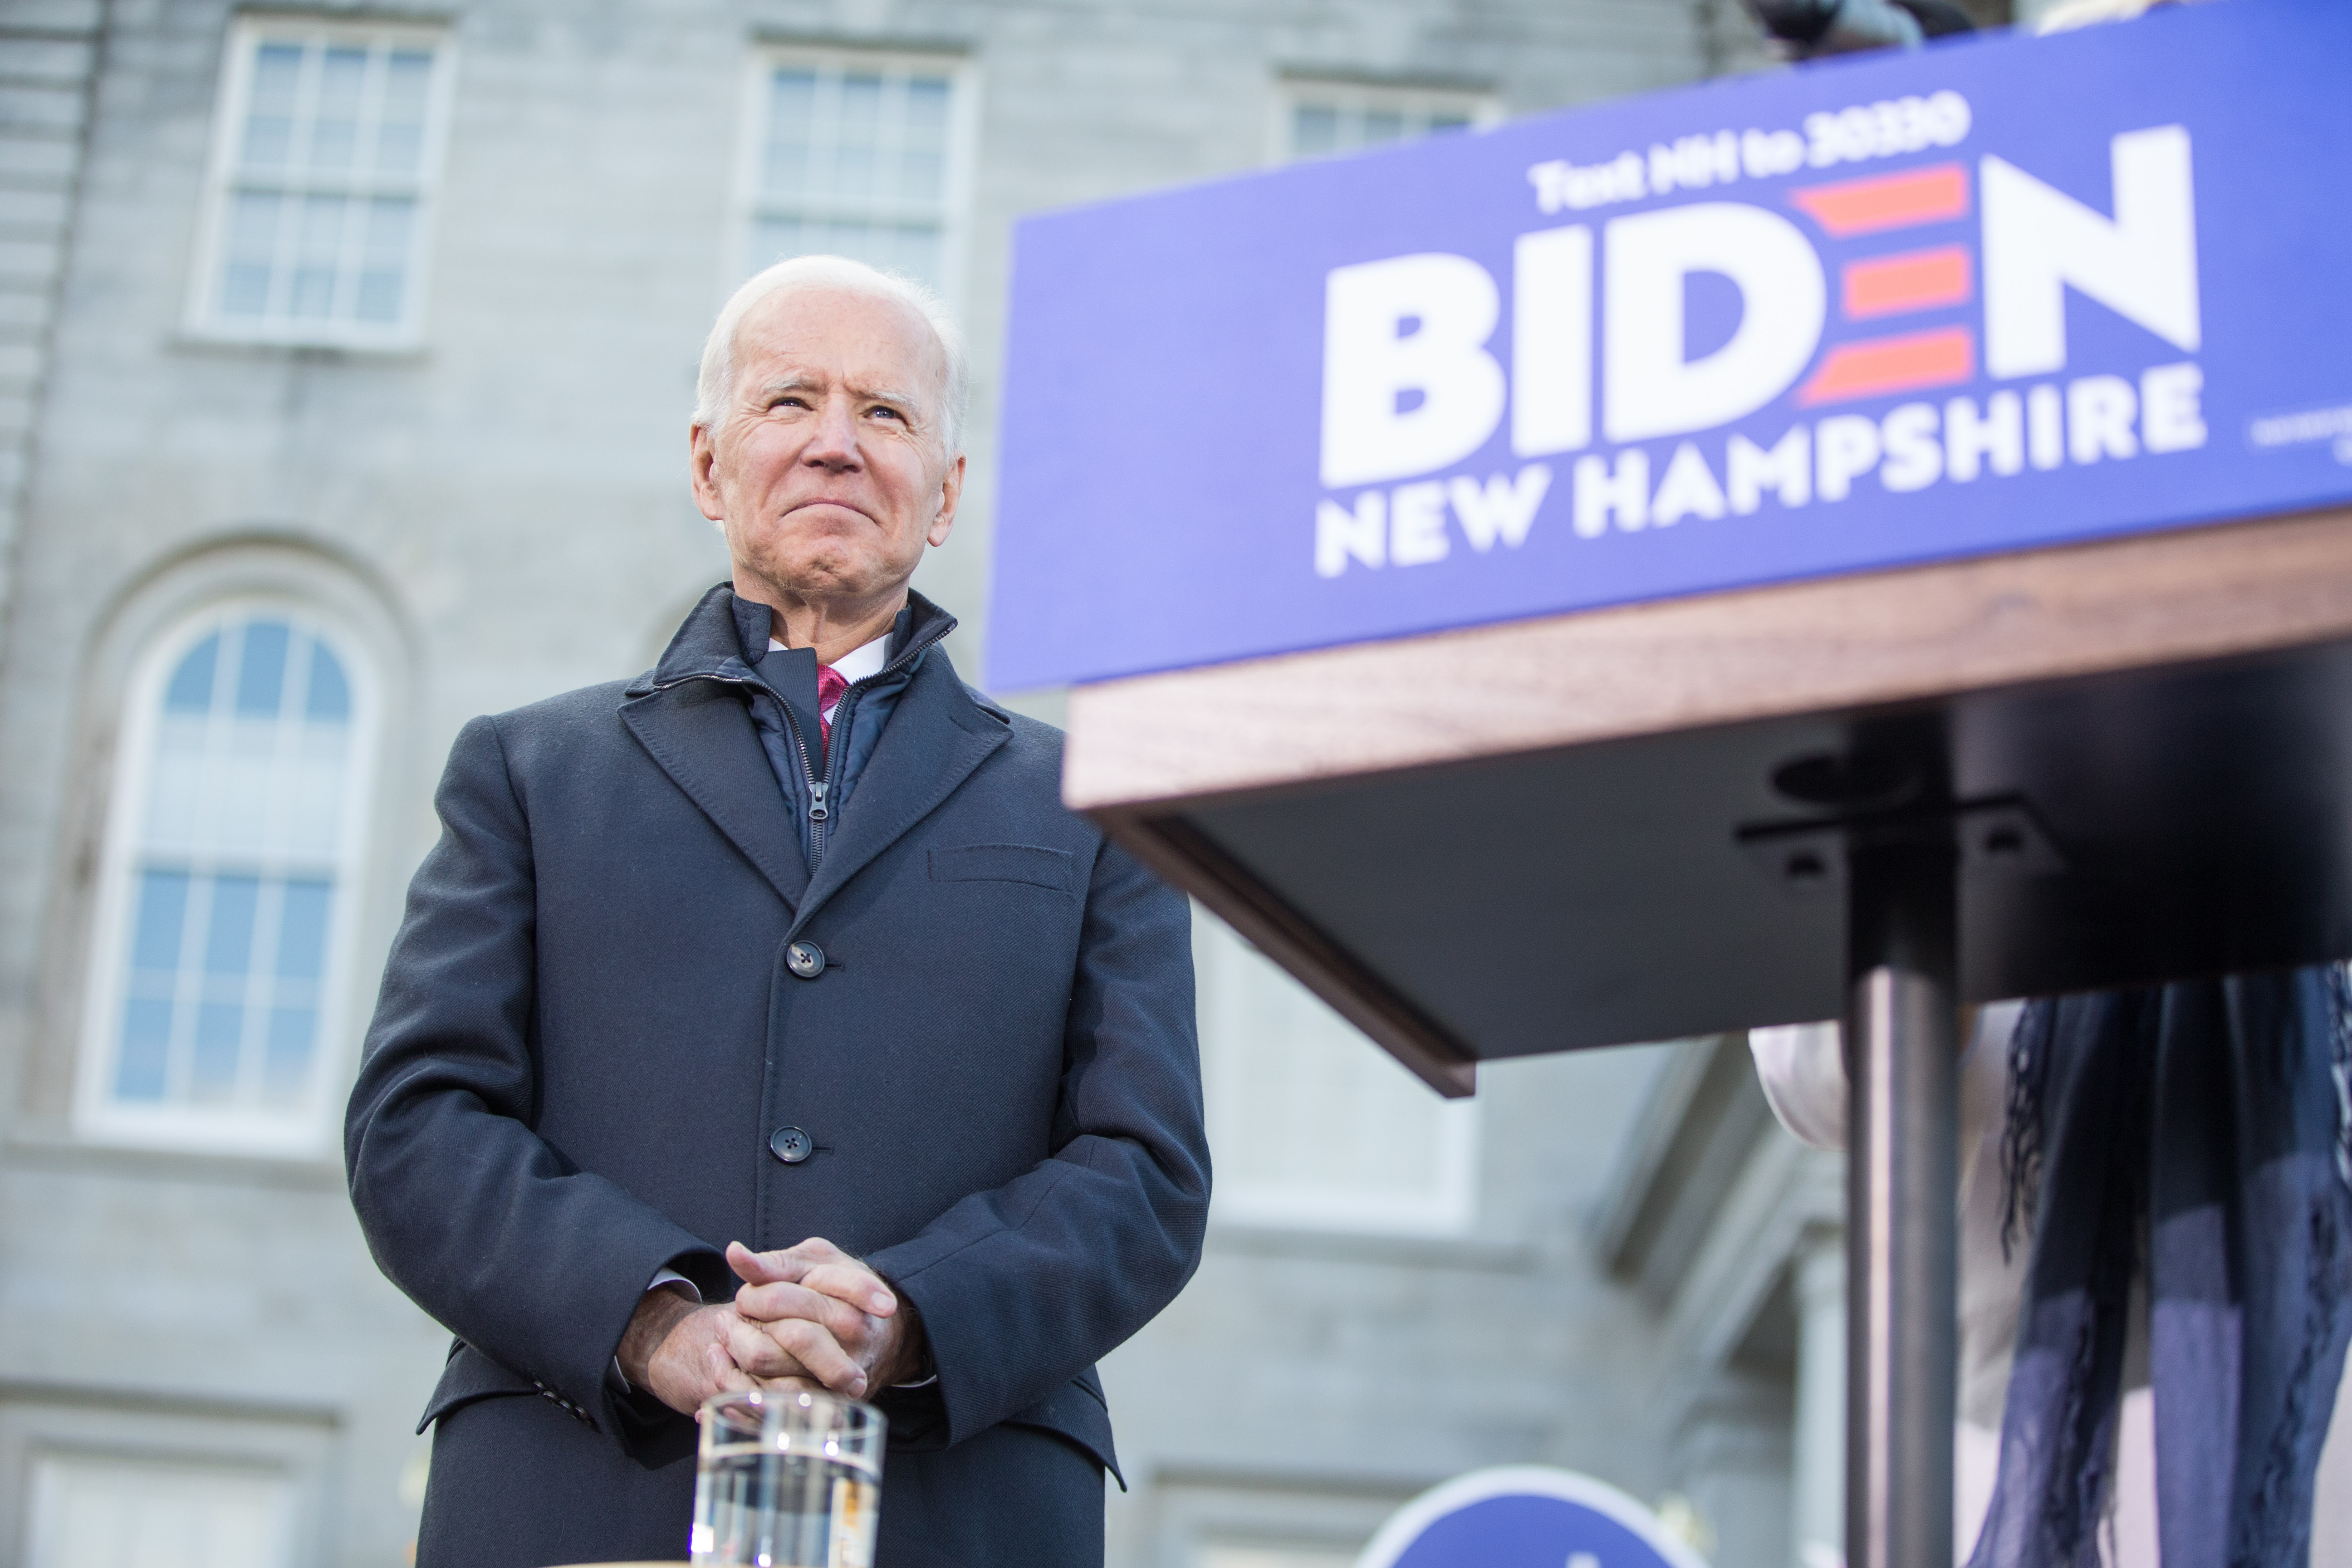 CONCORD, NH - NOVEMBER 08: Democratic presidential candidate, former vice President Joe Biden waits to be introduced during a rally after he signed his official paperwork for the New Hampshire Primary at the New Hampshire State House on November 8, 2019 in Concord, New Hampshire. The state's first-in-the-nation primary will be held on February 11, 2020. (Photo by Scott Eisen/Getty Images)